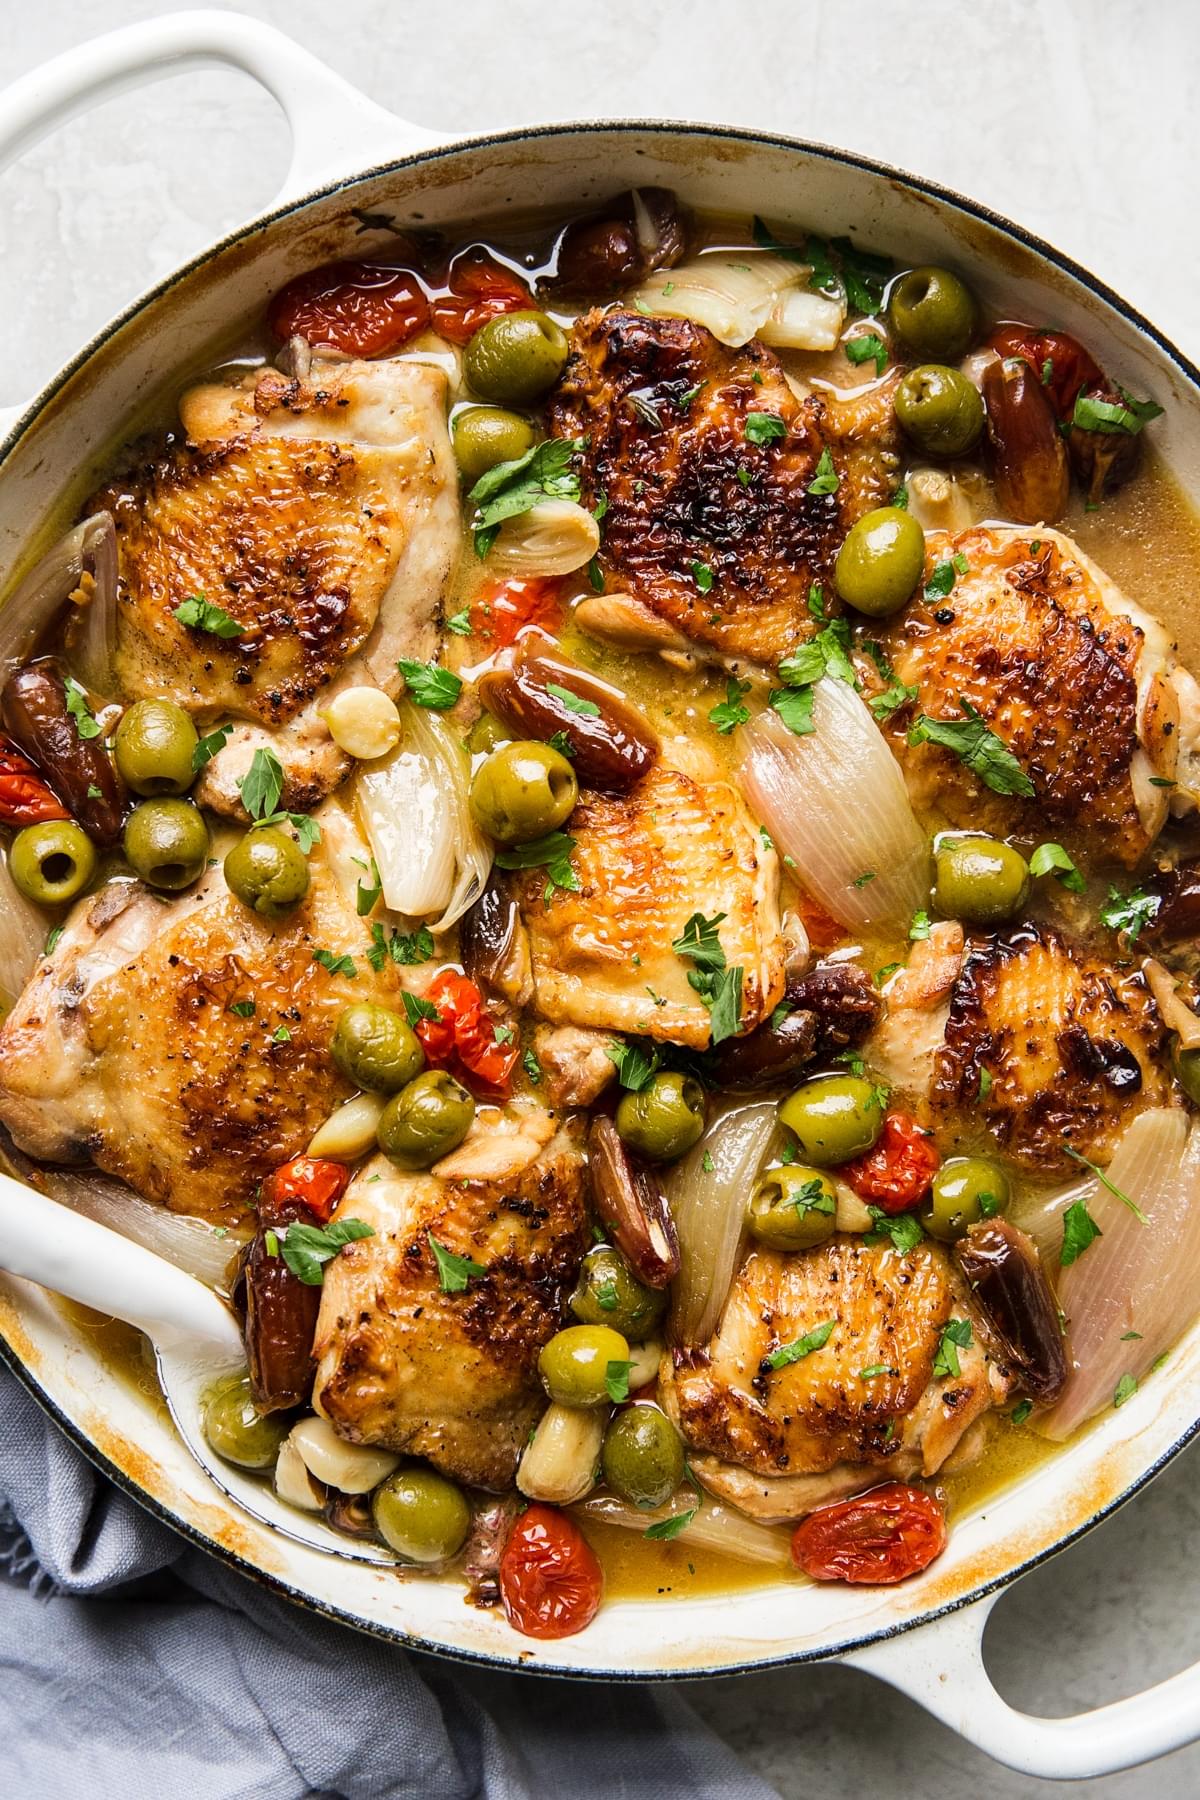 Provençal chicken with olives, tomatoes, shallots, and white wine being scooped with a serving spoon